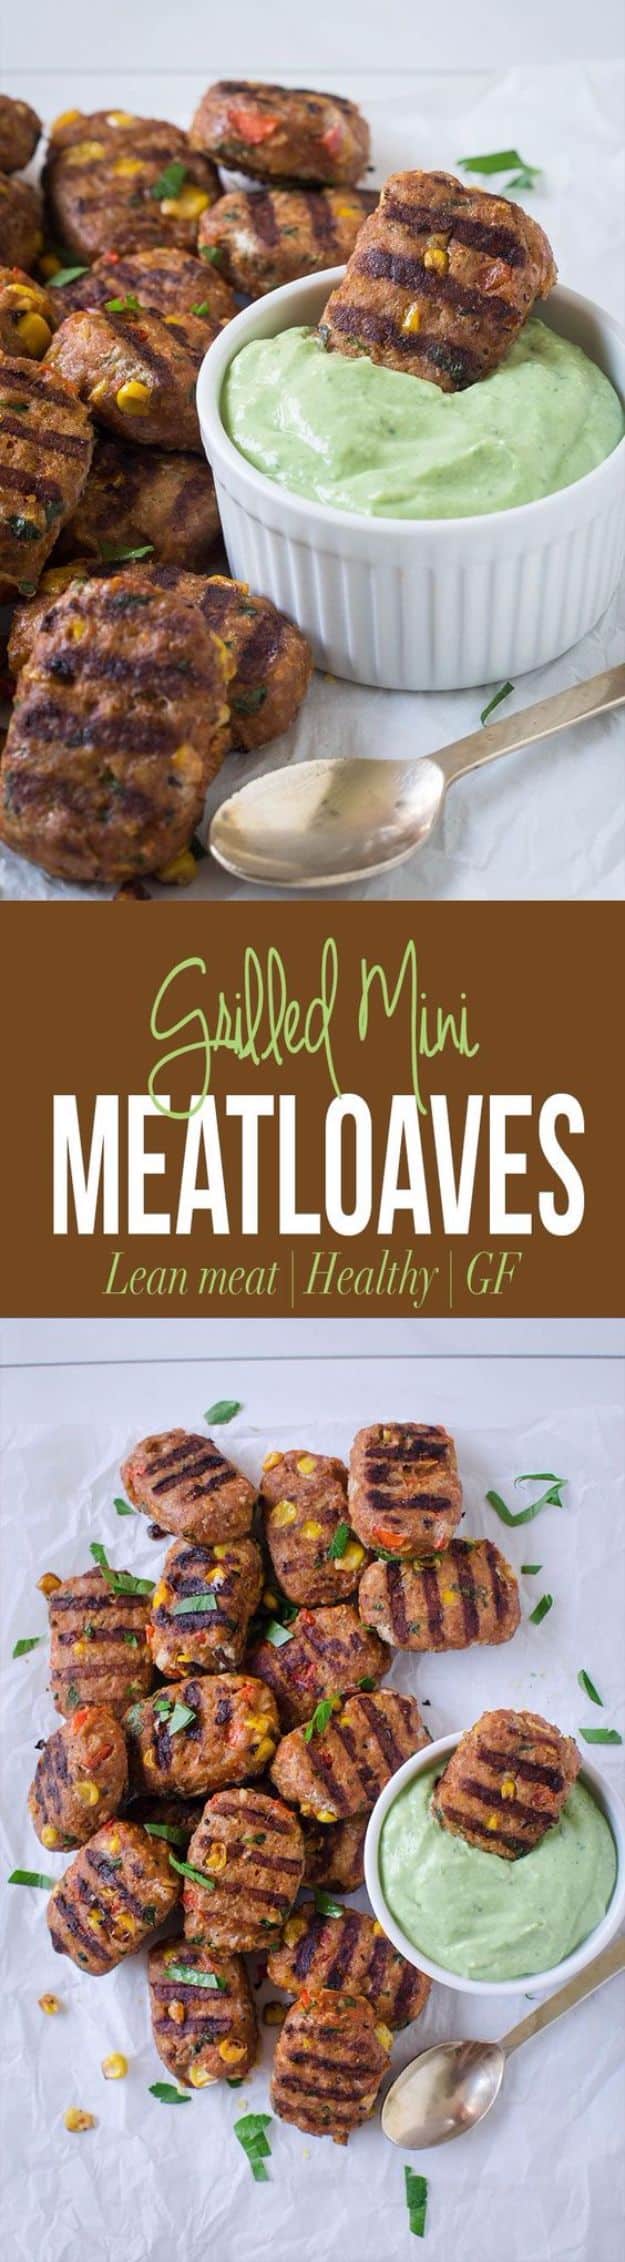 Best Recipe Ideas for Summer - Grilled Turkey Mini Meatloaves - Cool Salads, Easy Side Dishes, Recipes for Summer Foods and Dinner to Beat the Heat - Light and Healthy Ideas for Hot Summer Nights, Pool Parties and Picnics http://diyjoy.com/best-recipes-summer